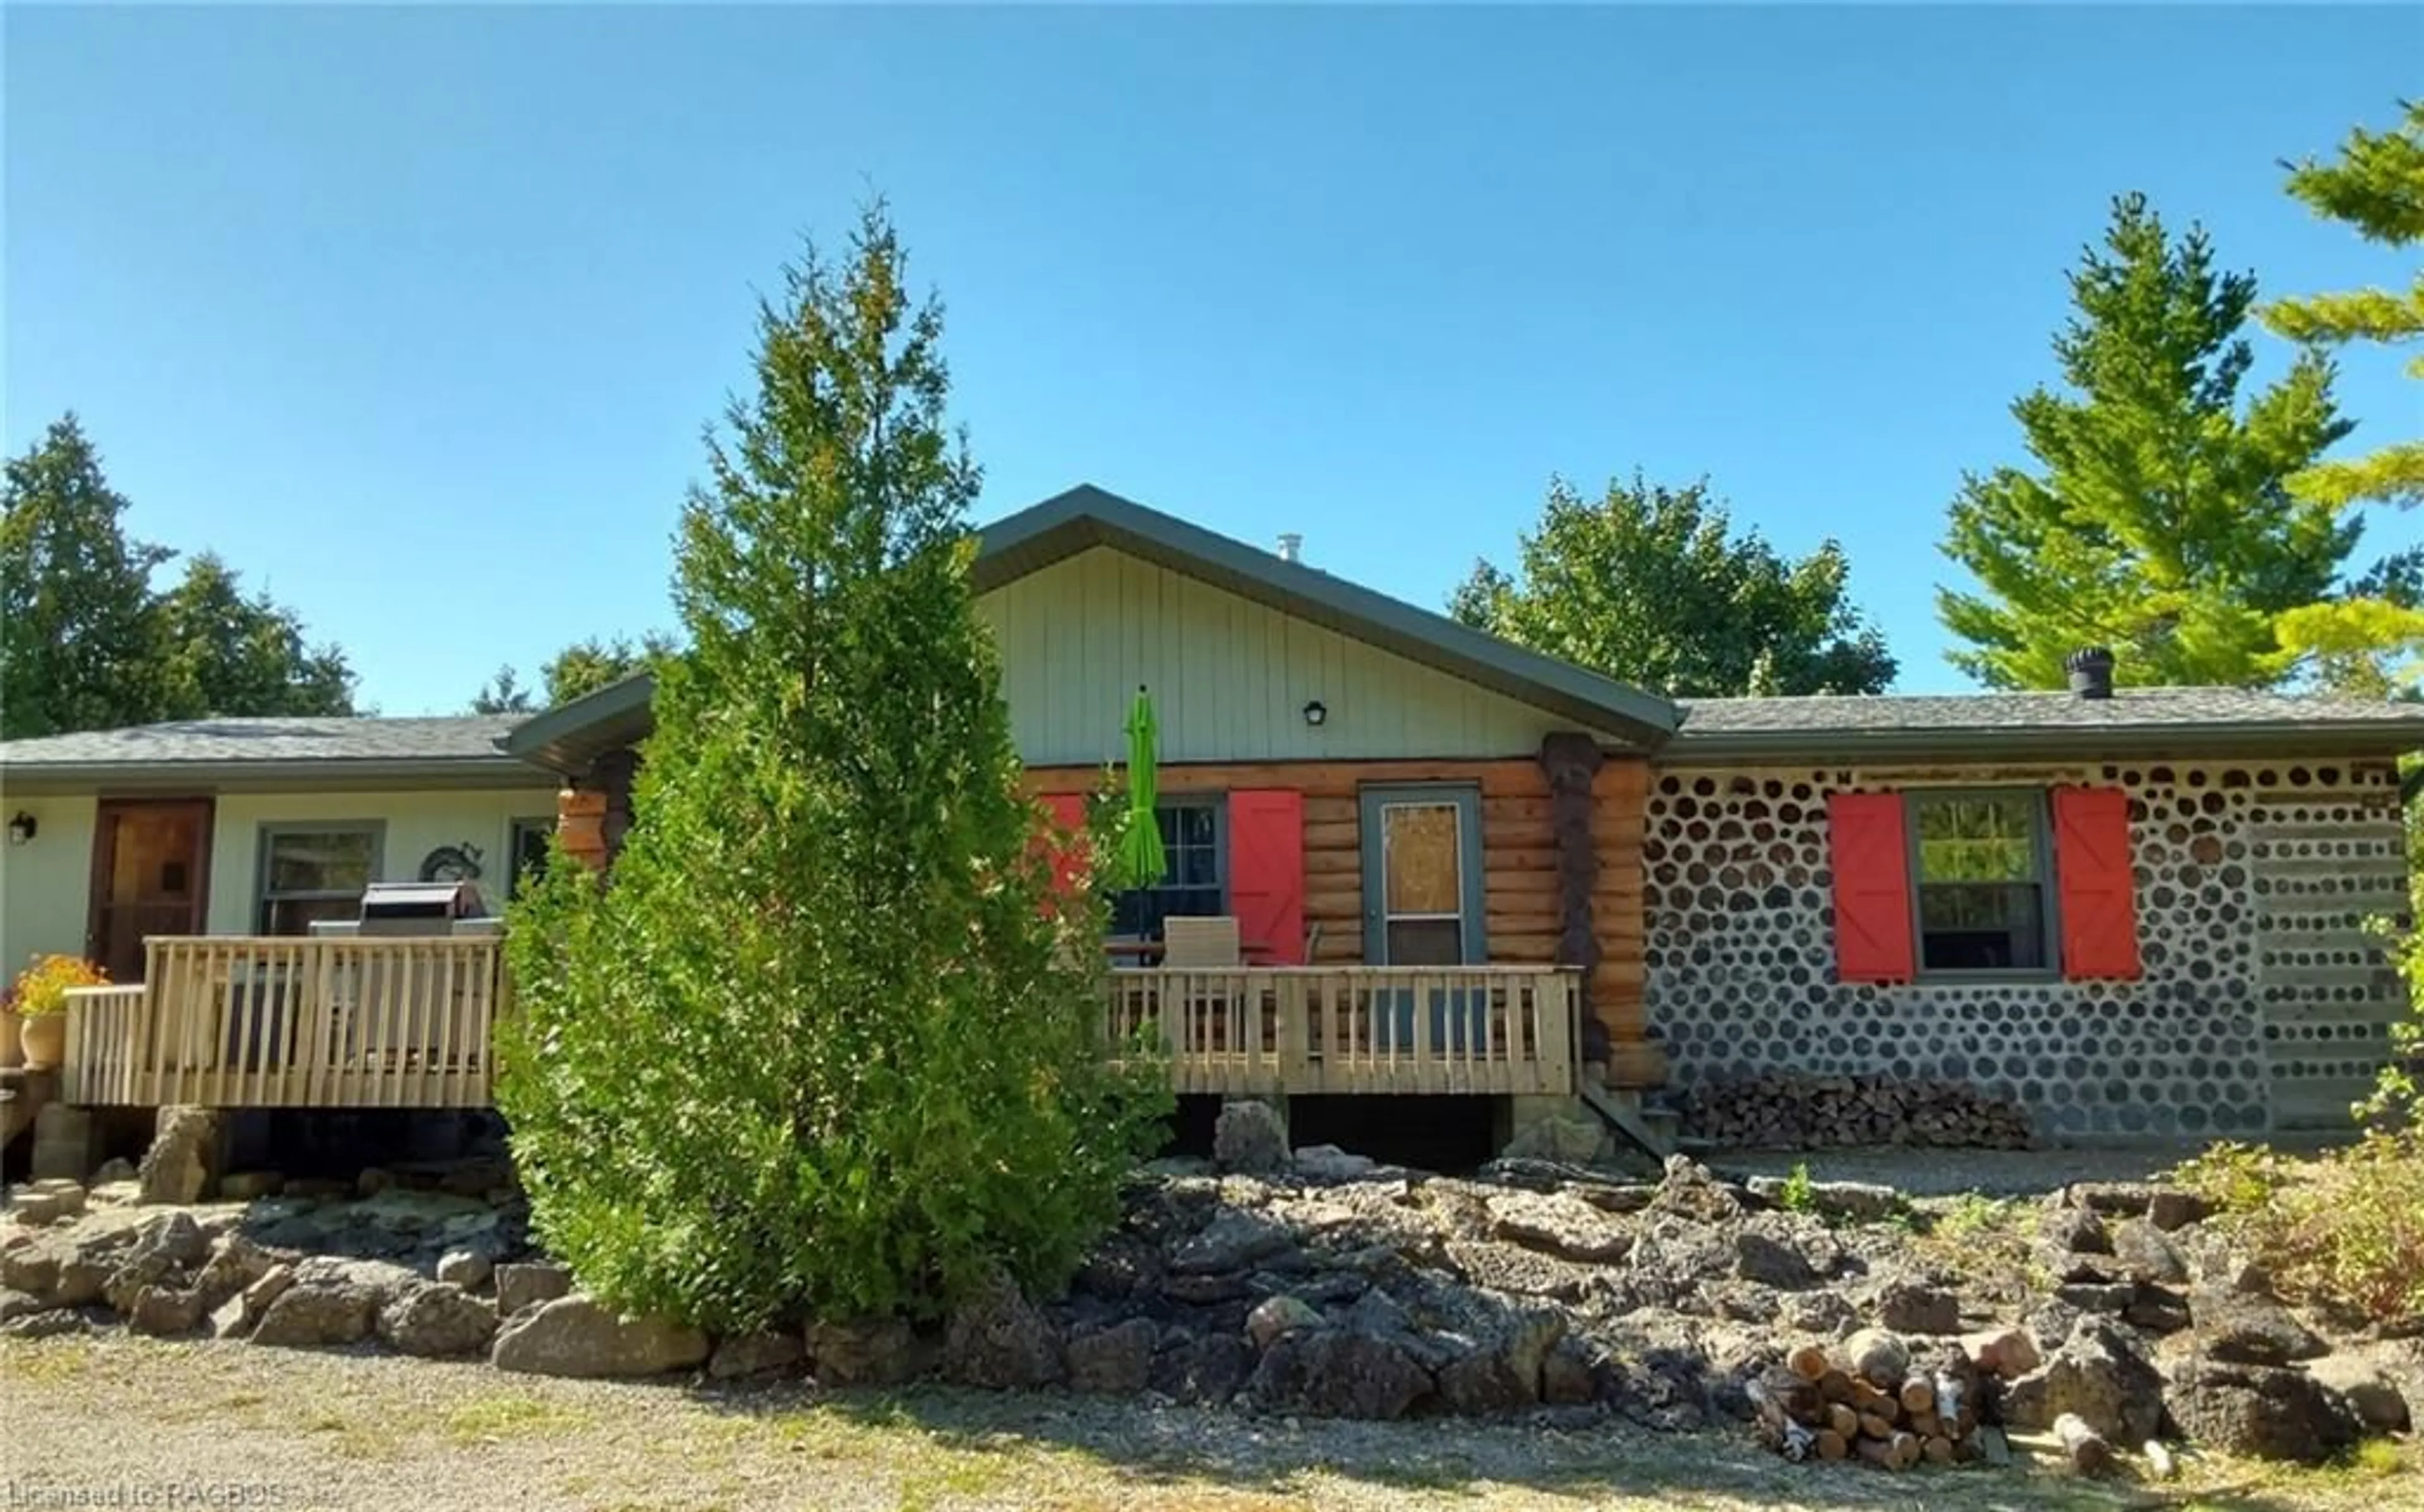 Cottage for 579 Cape Hurd Rd, Tobermory Ontario N0H 2R0